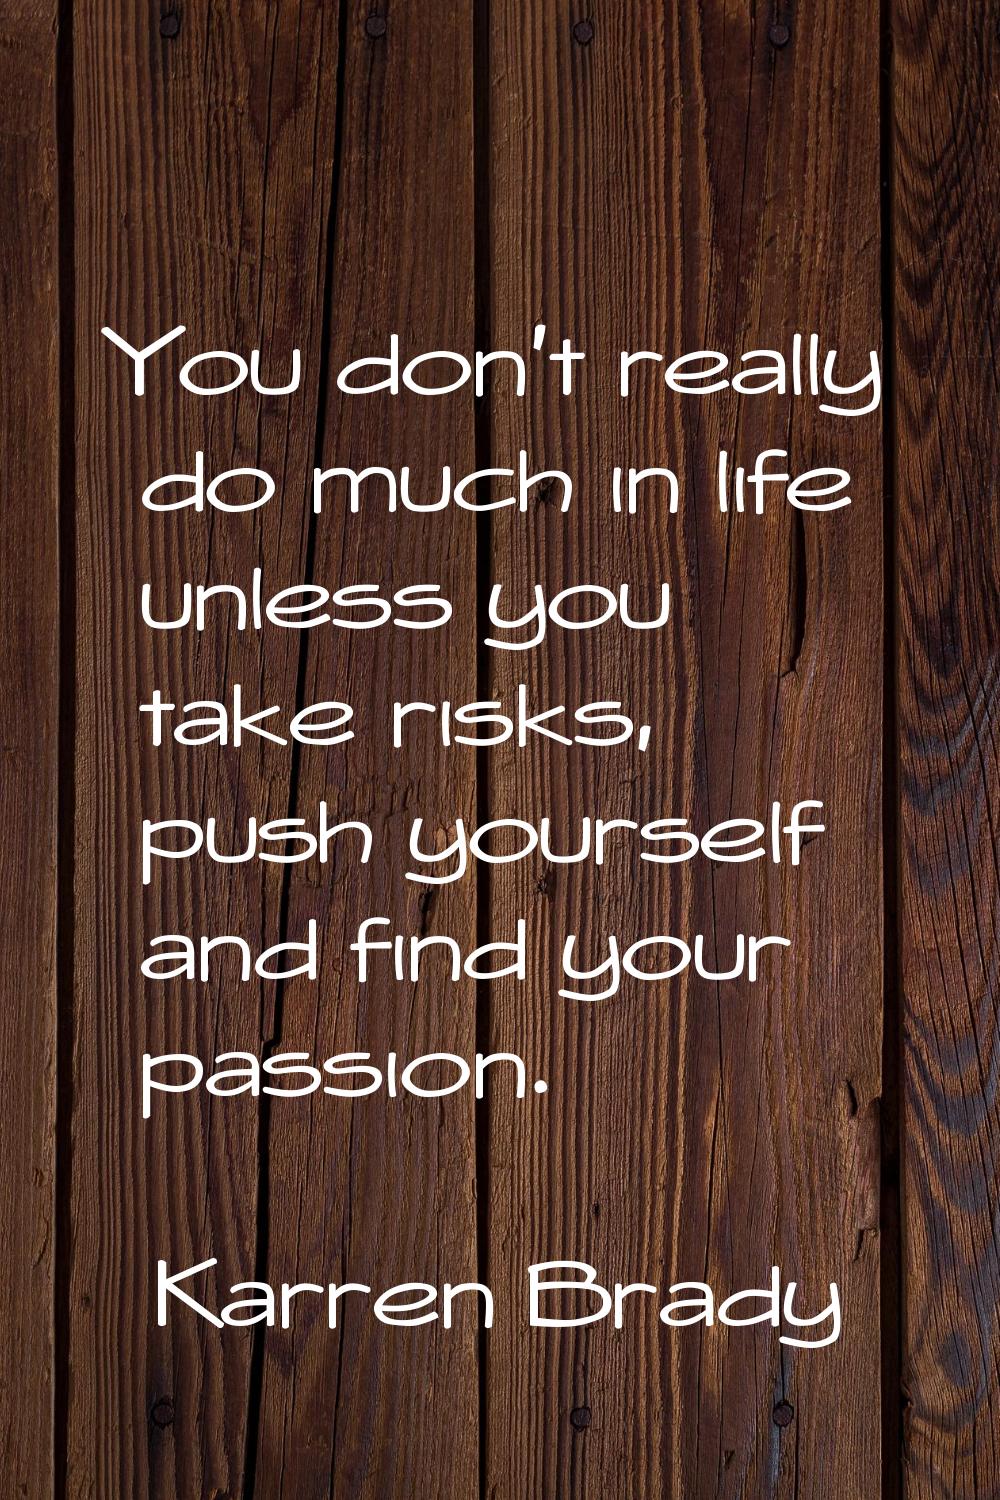 You don't really do much in life unless you take risks, push yourself and find your passion.